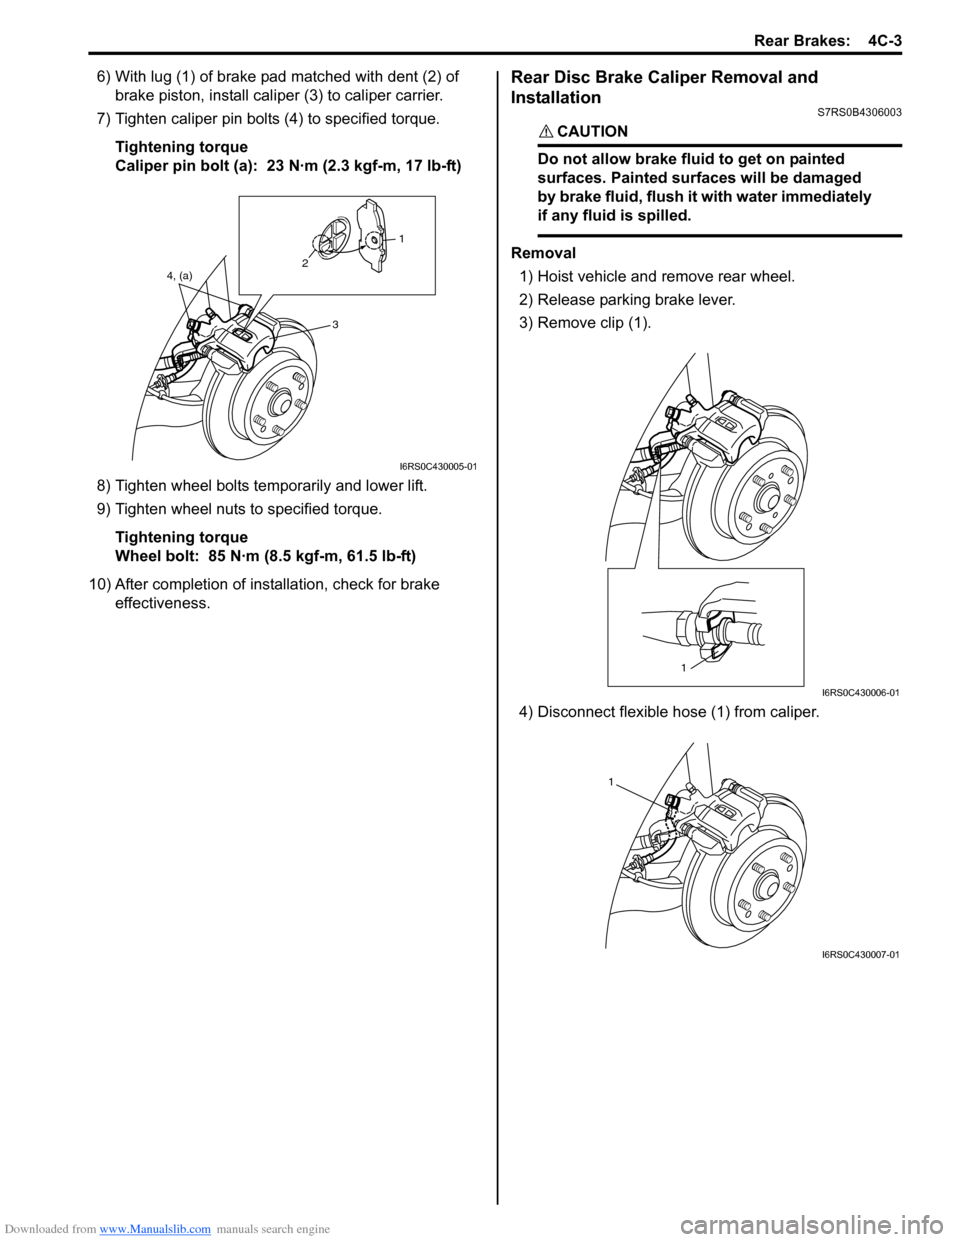 SUZUKI SWIFT 2008 2.G Service Owners Guide Downloaded from www.Manualslib.com manuals search engine Rear Brakes:  4C-3
6) With lug (1) of brake pad matched with dent (2) of brake piston, install caliper  (3) to caliper carrier.
7) Tighten cali